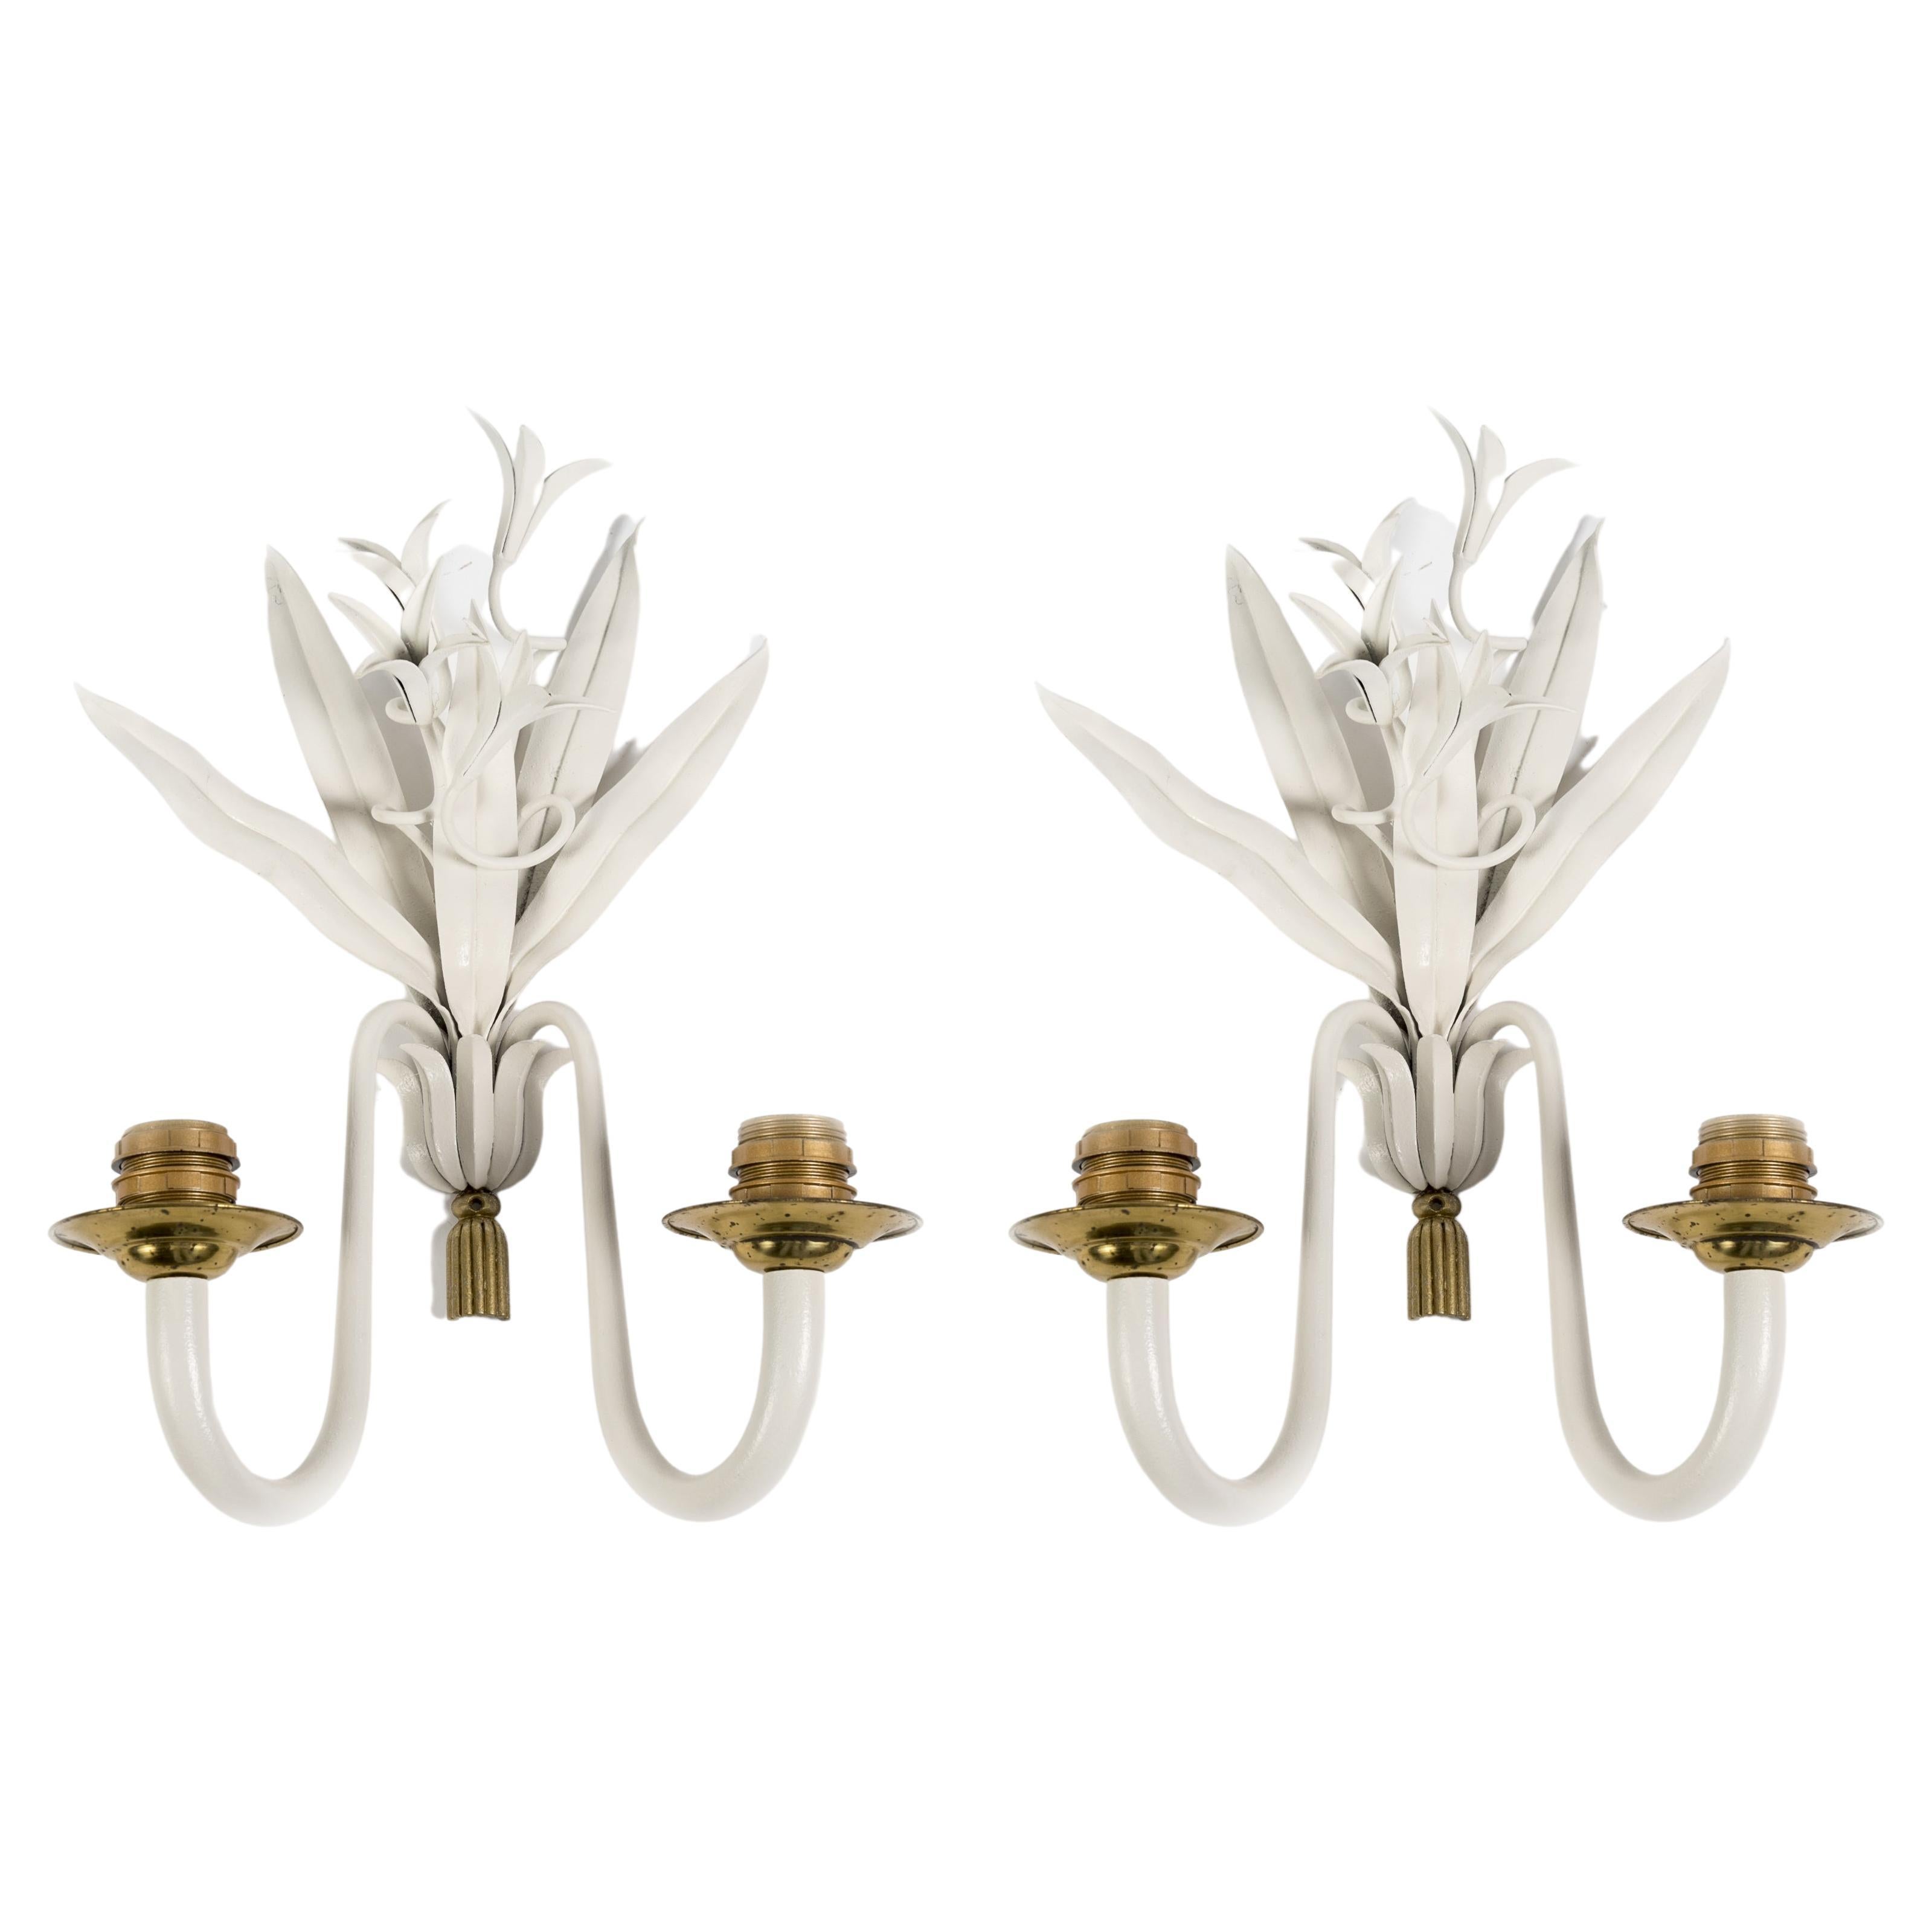 1940's Pair of Sconces Attributed to Maison Baguès